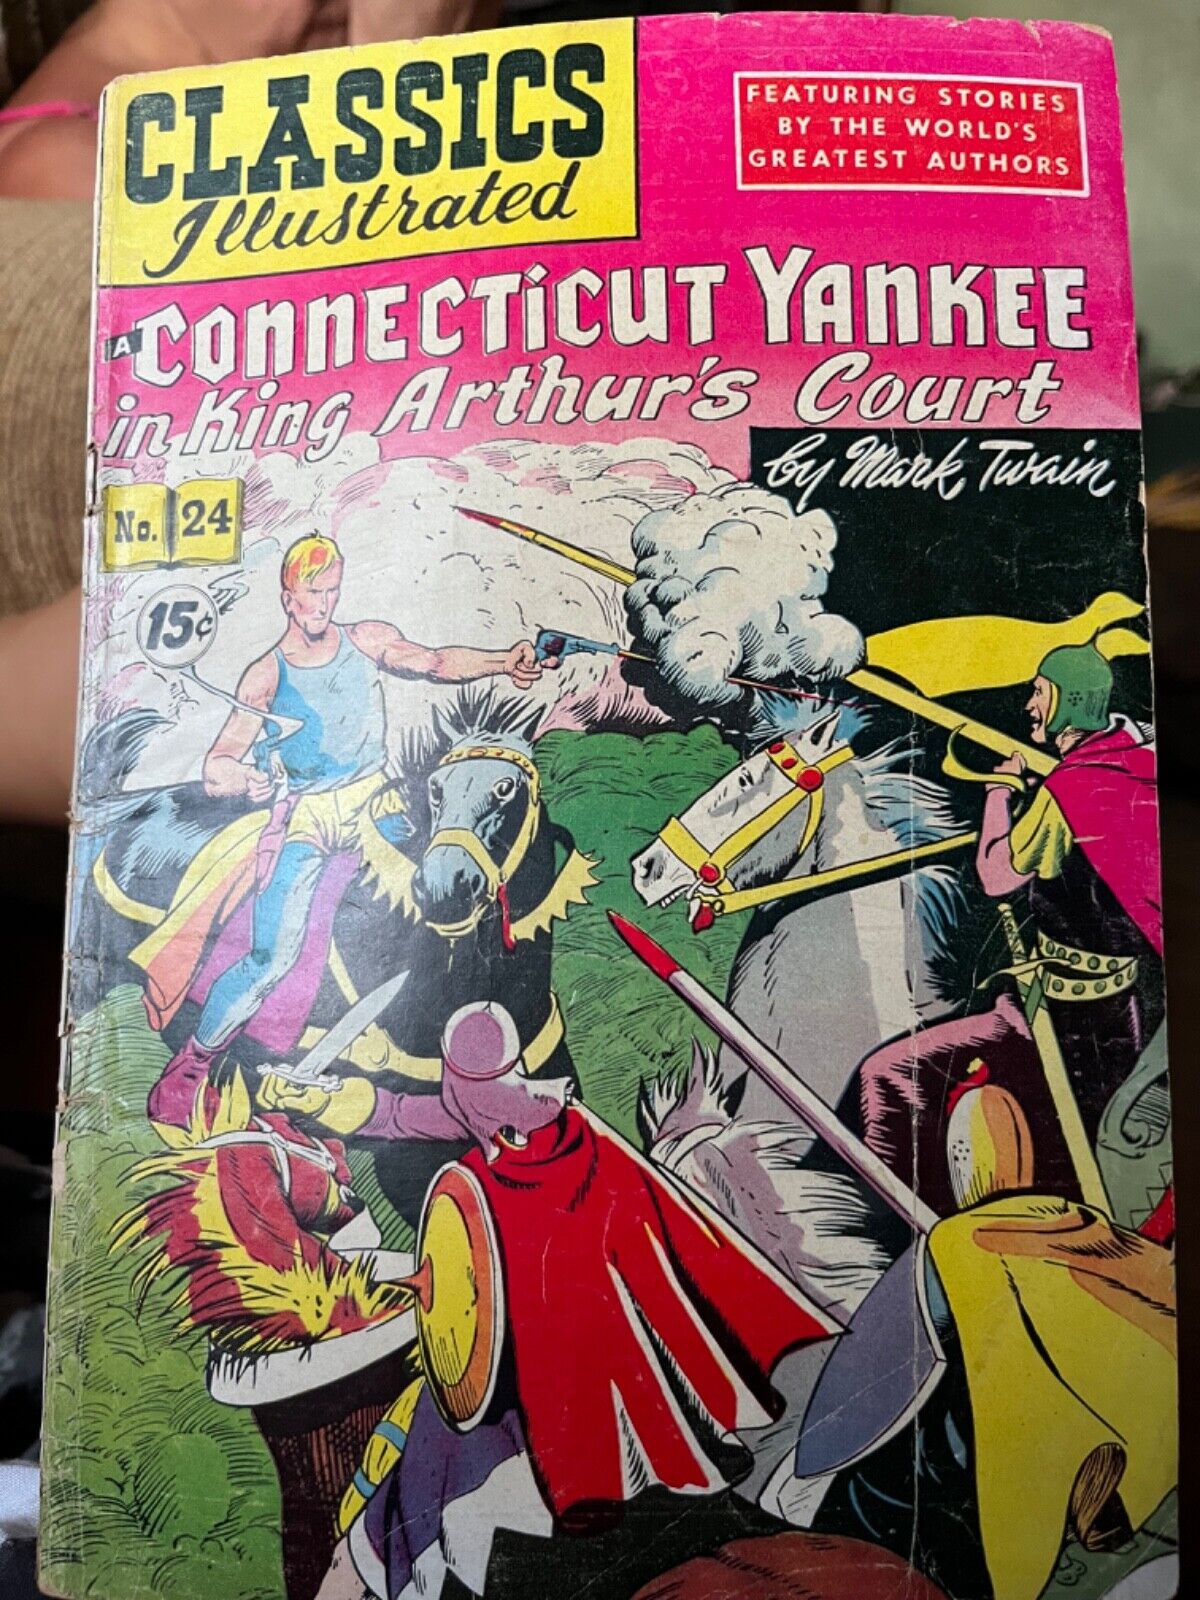 CLASSICS ILLUSTRATED #24 - Connecticut Yankee in King Arthur\'s Court